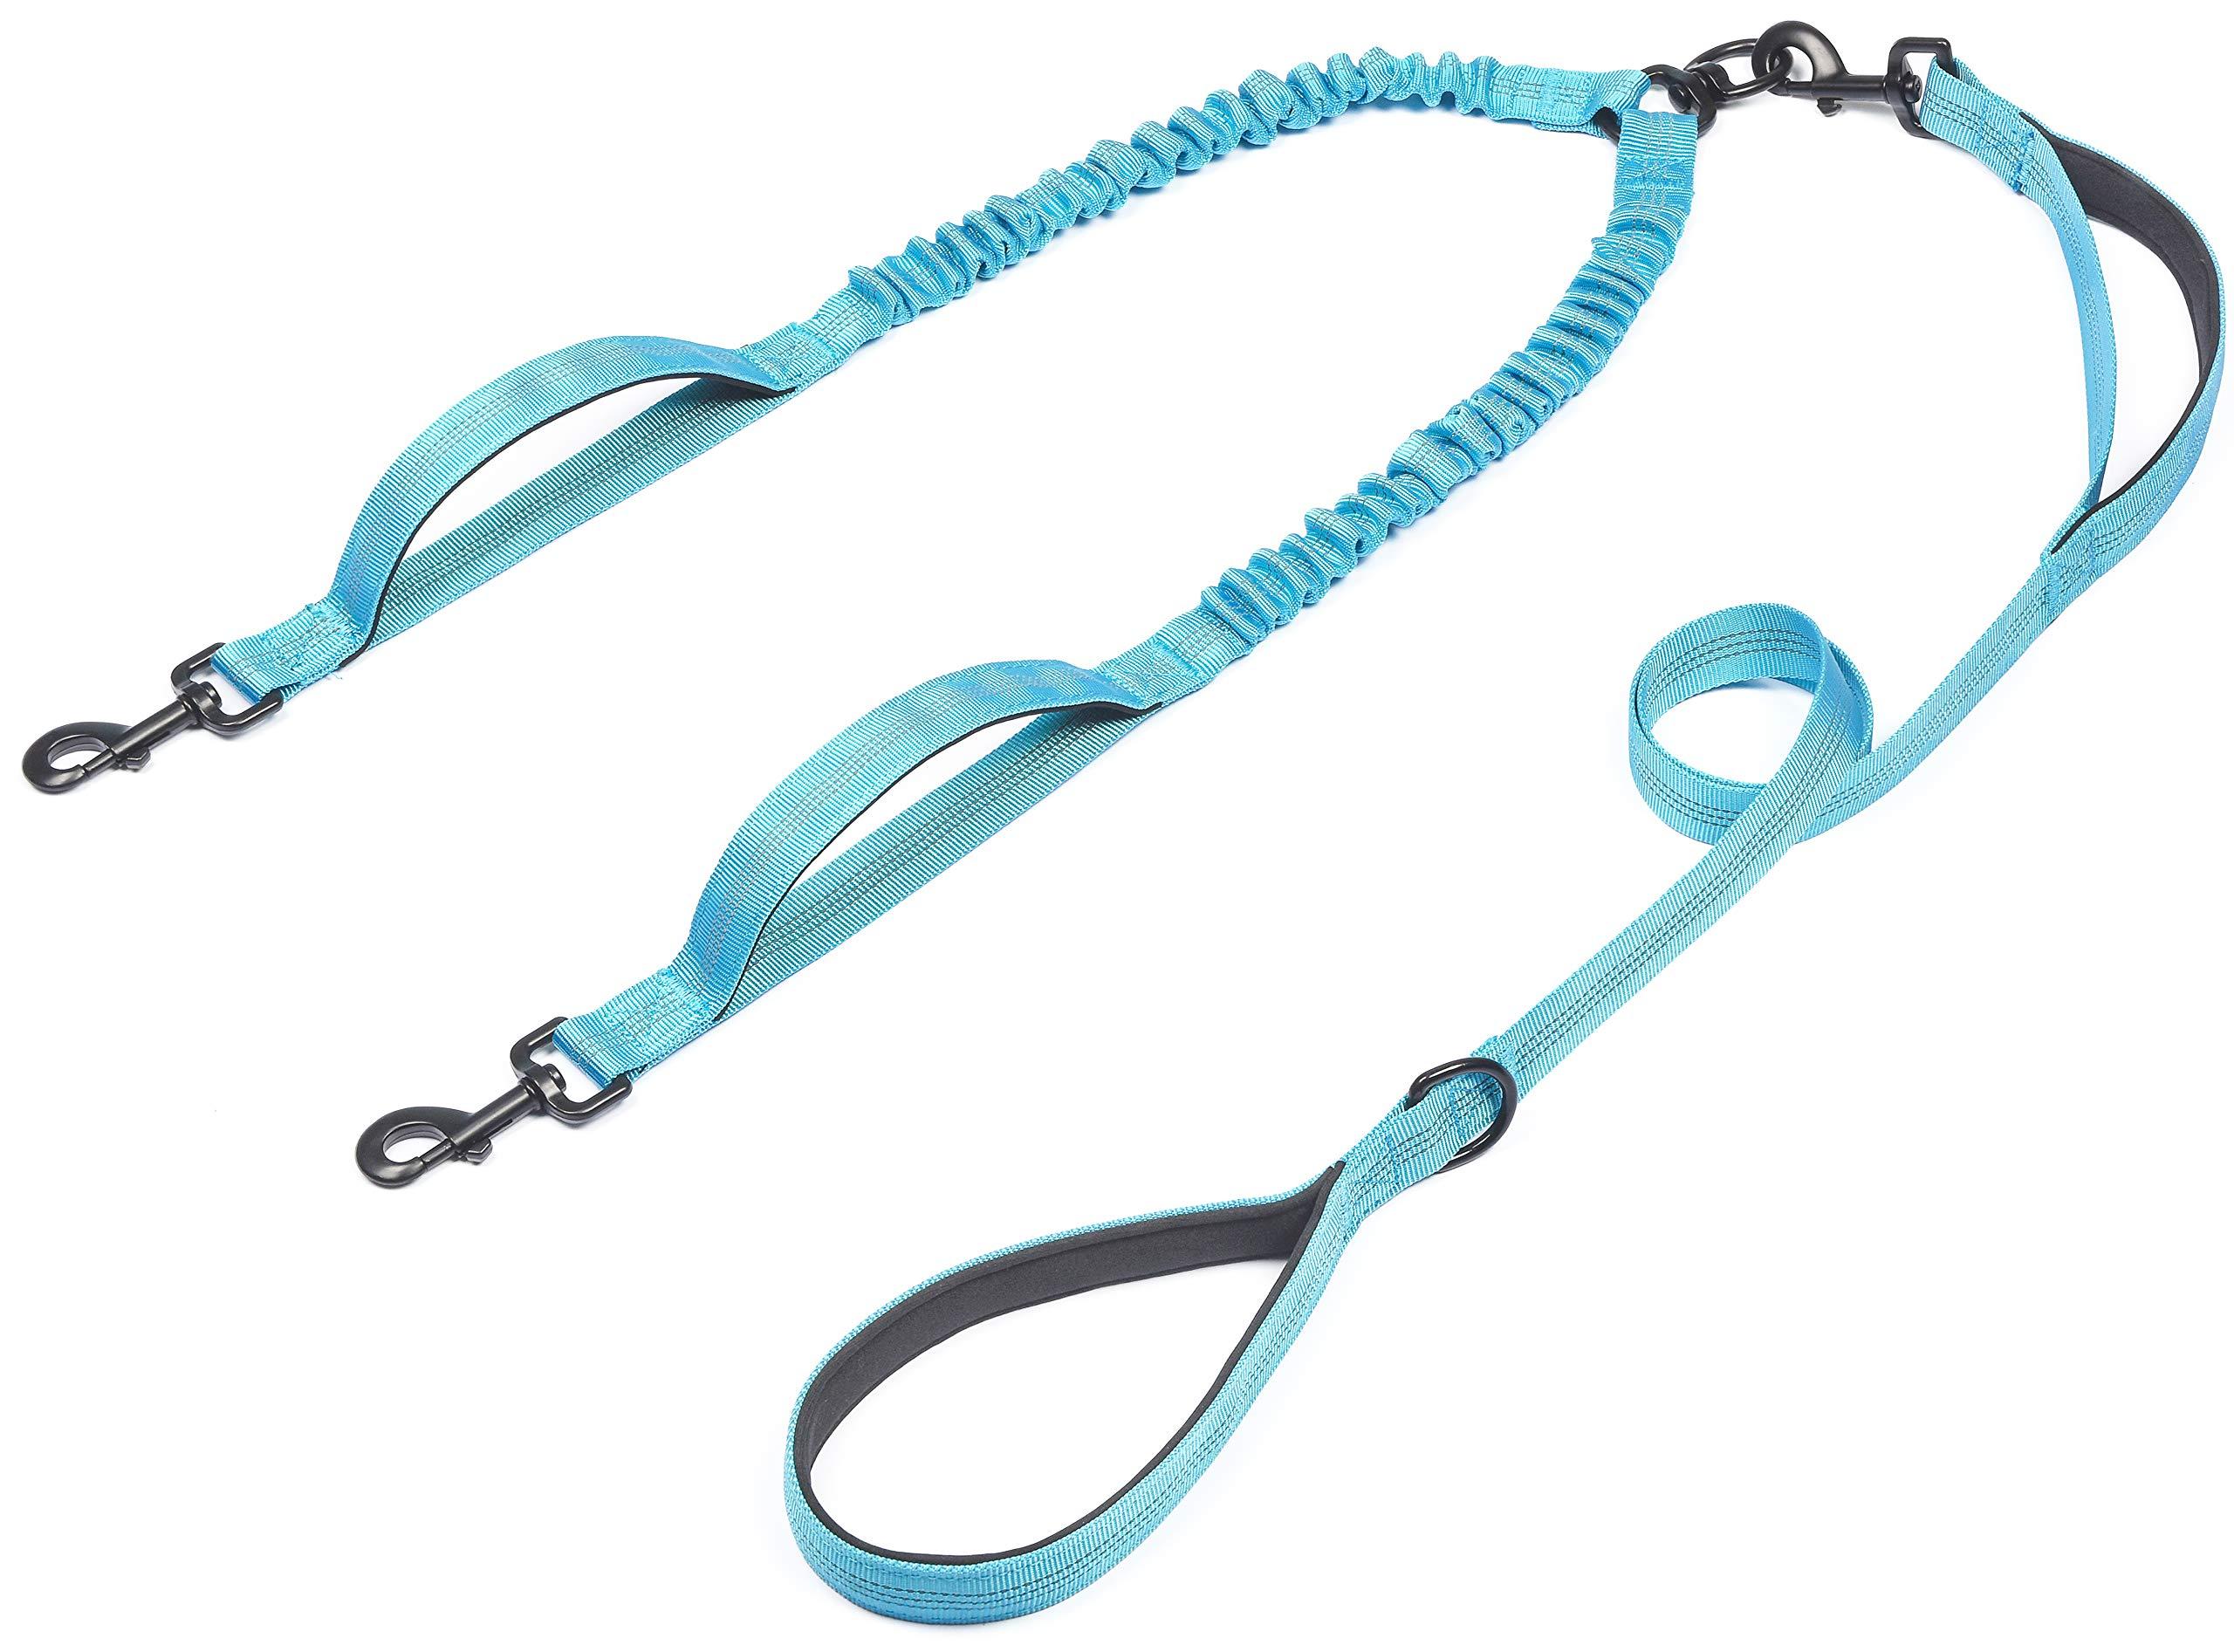 iYoShop Double Dog Leash with Three Extra Traffic Handles, 360 Swivel No Tangle Dual Dog Walking Leash, Comfortable Shock Absorbing Reflective Bungee for Two Dogs(15-120 lbs, Blue)